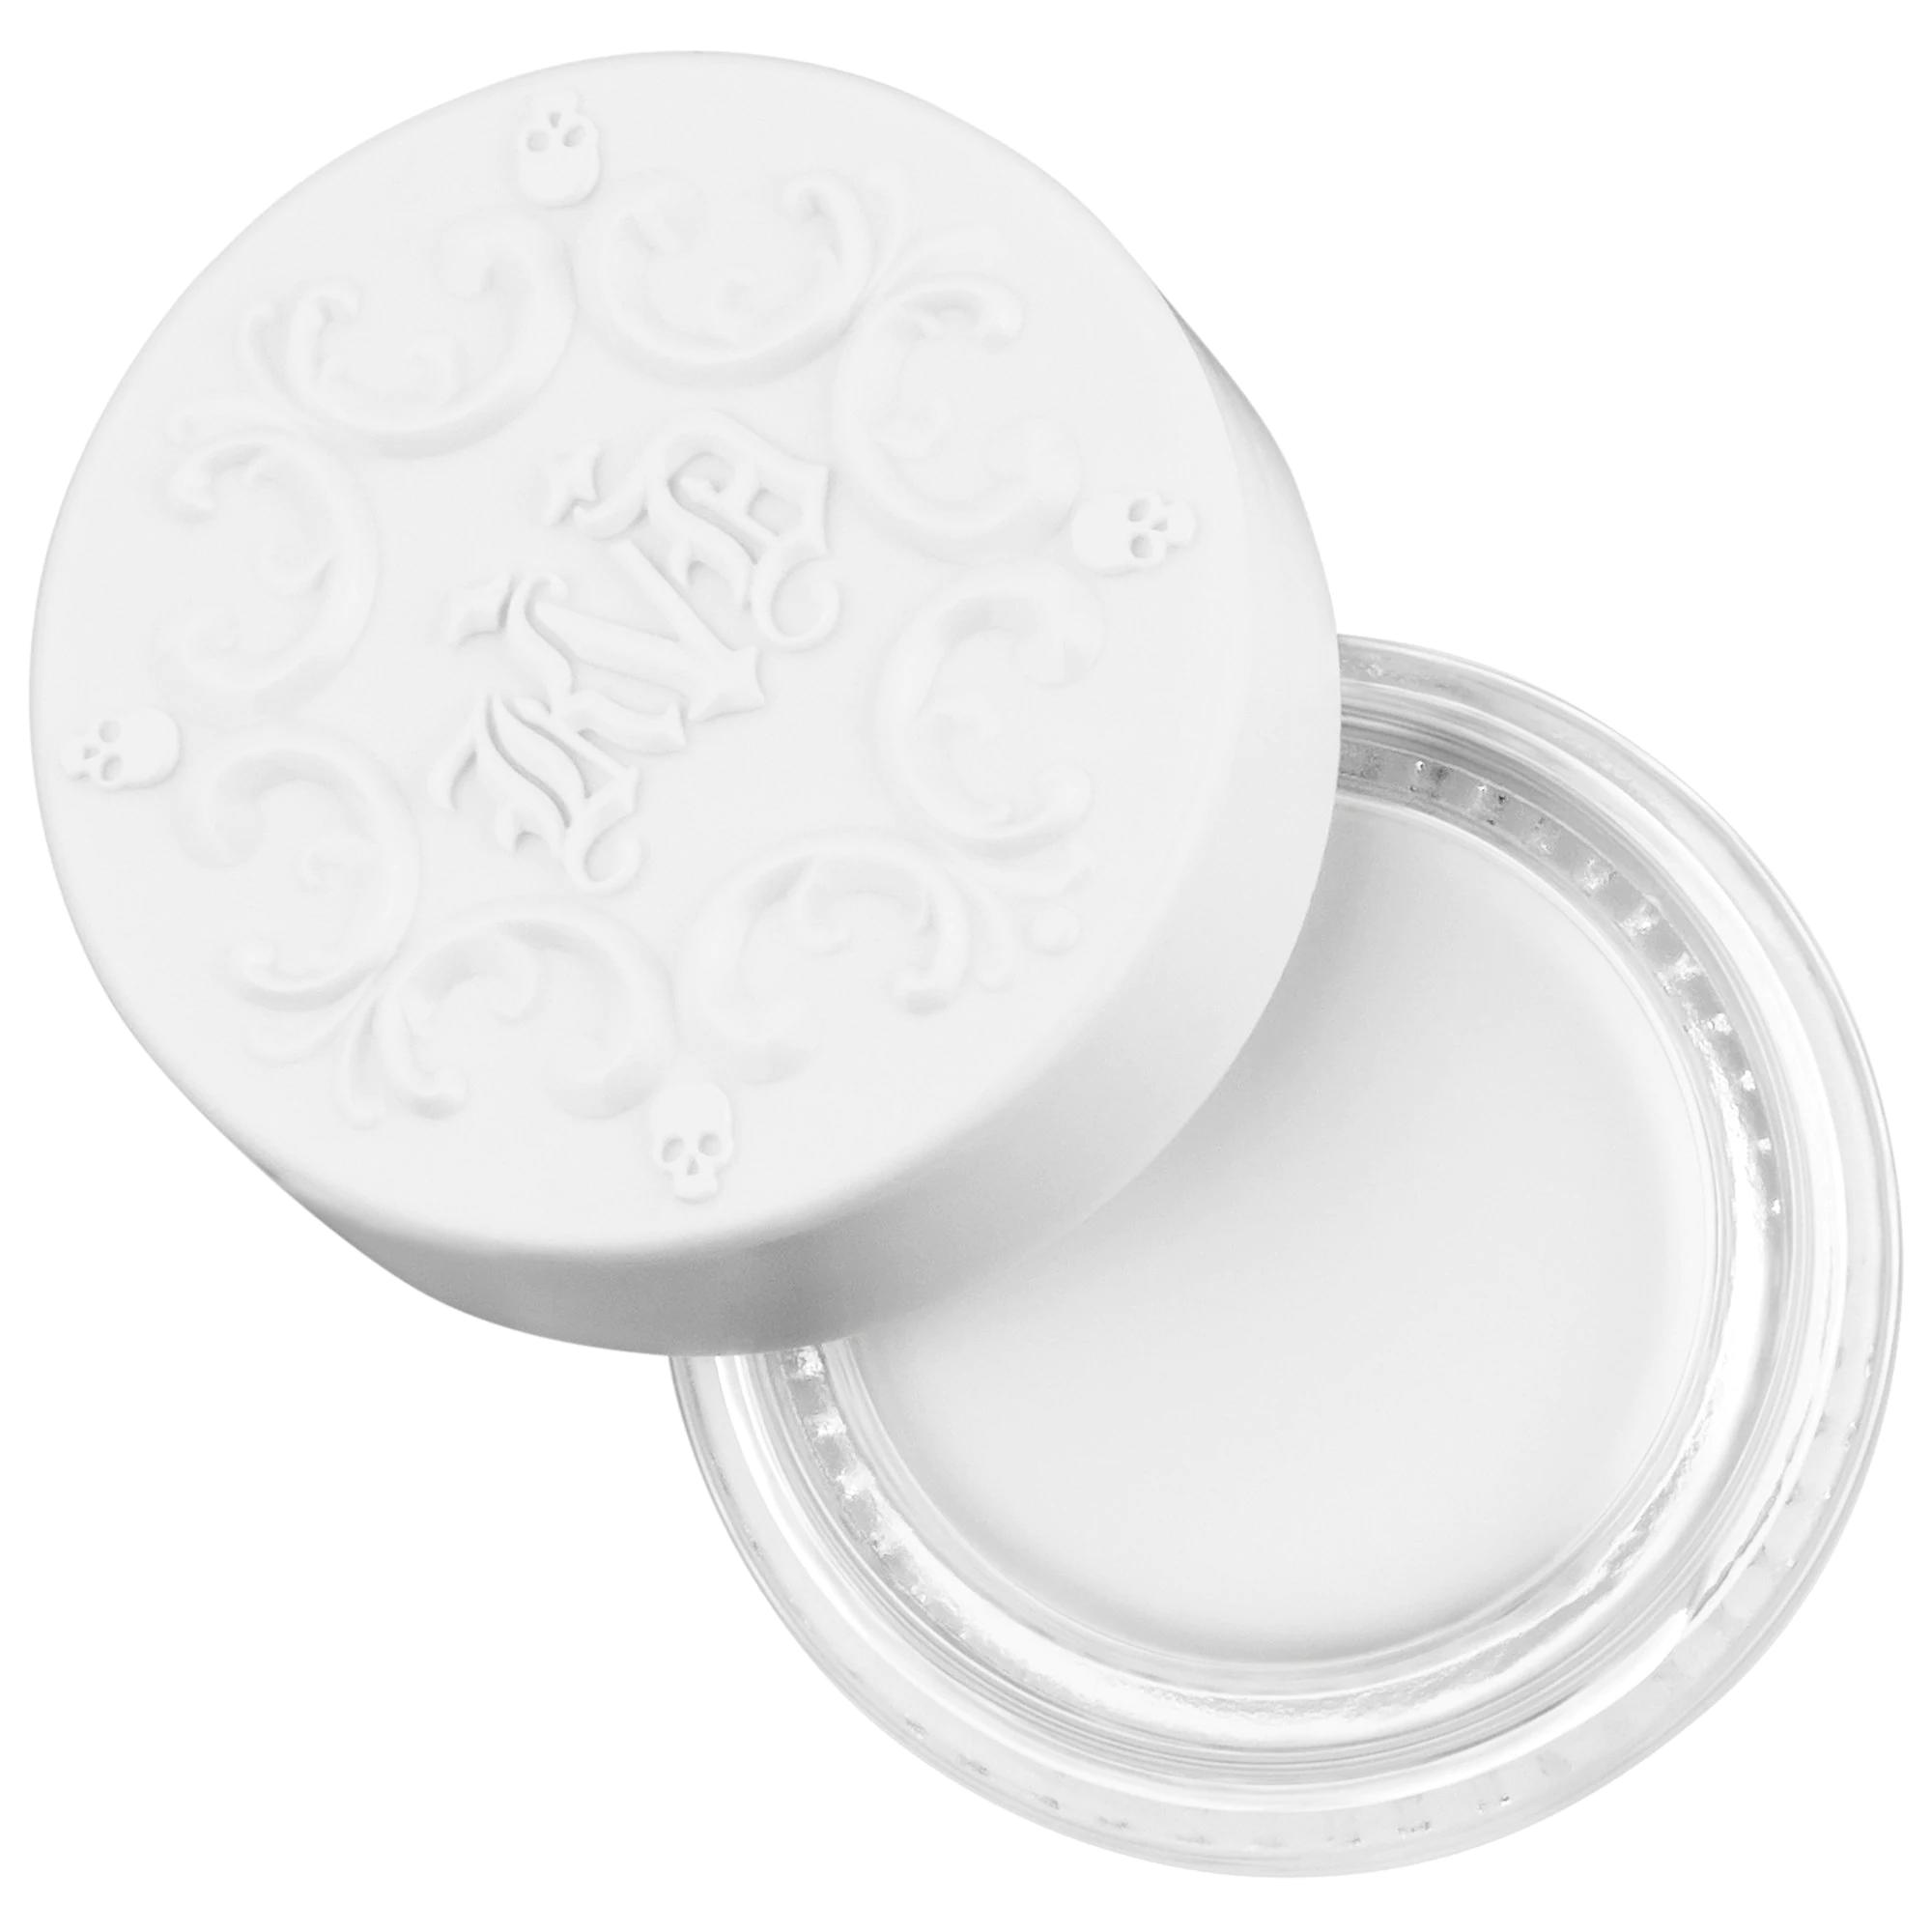 Kat Von D 24-Hour Super Brow Long-Wear Pomade White Out